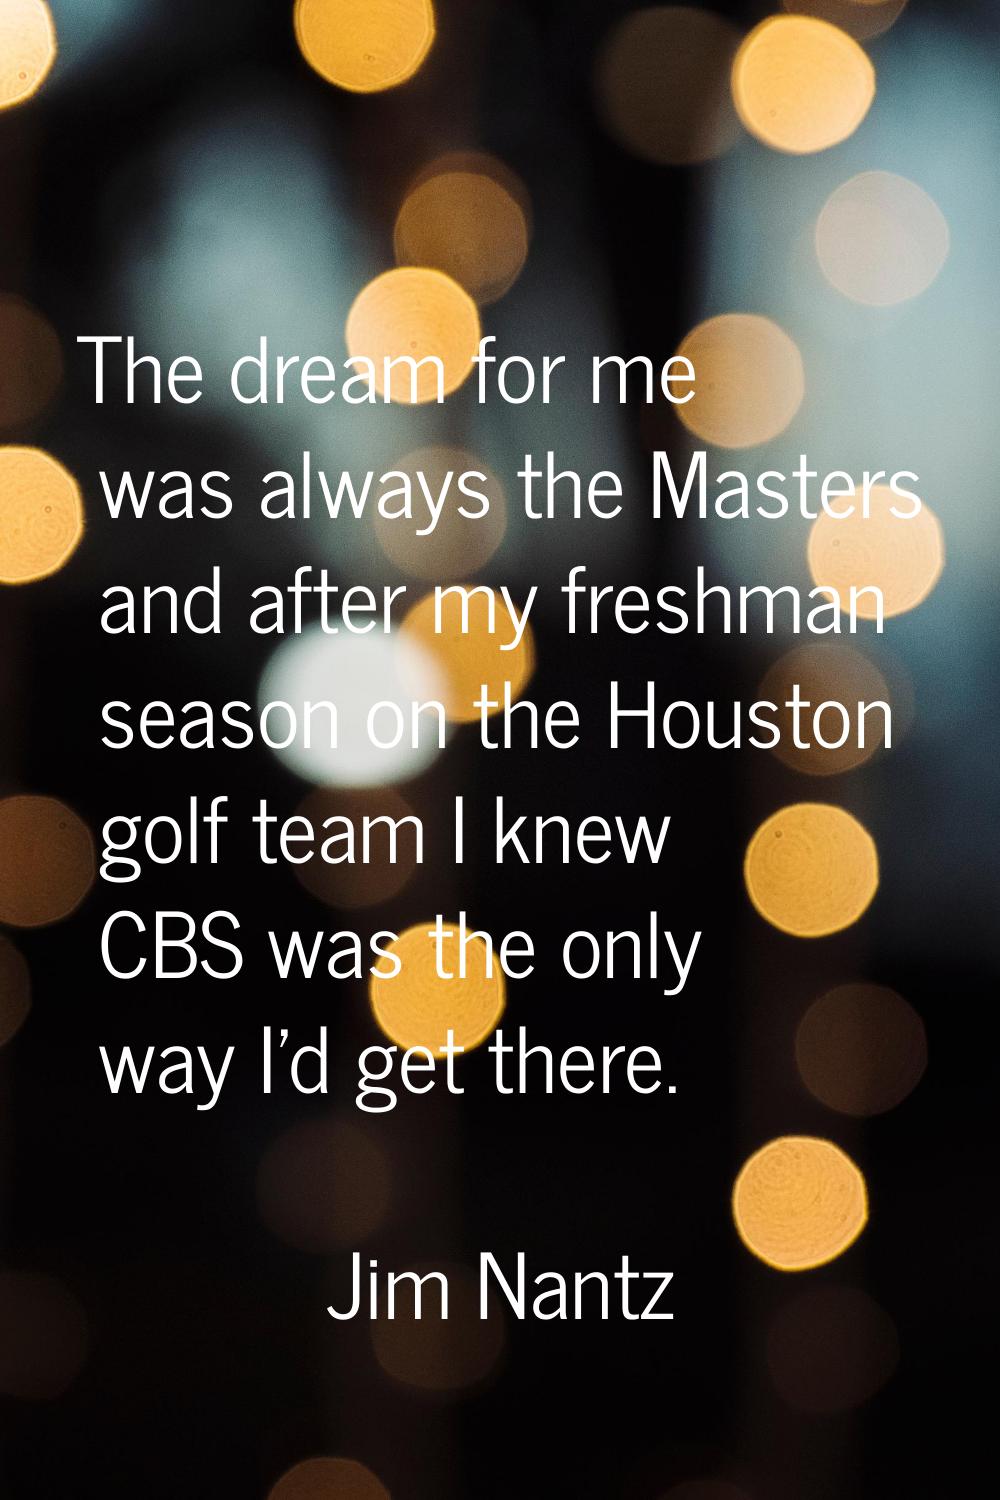 The dream for me was always the Masters and after my freshman season on the Houston golf team I kne